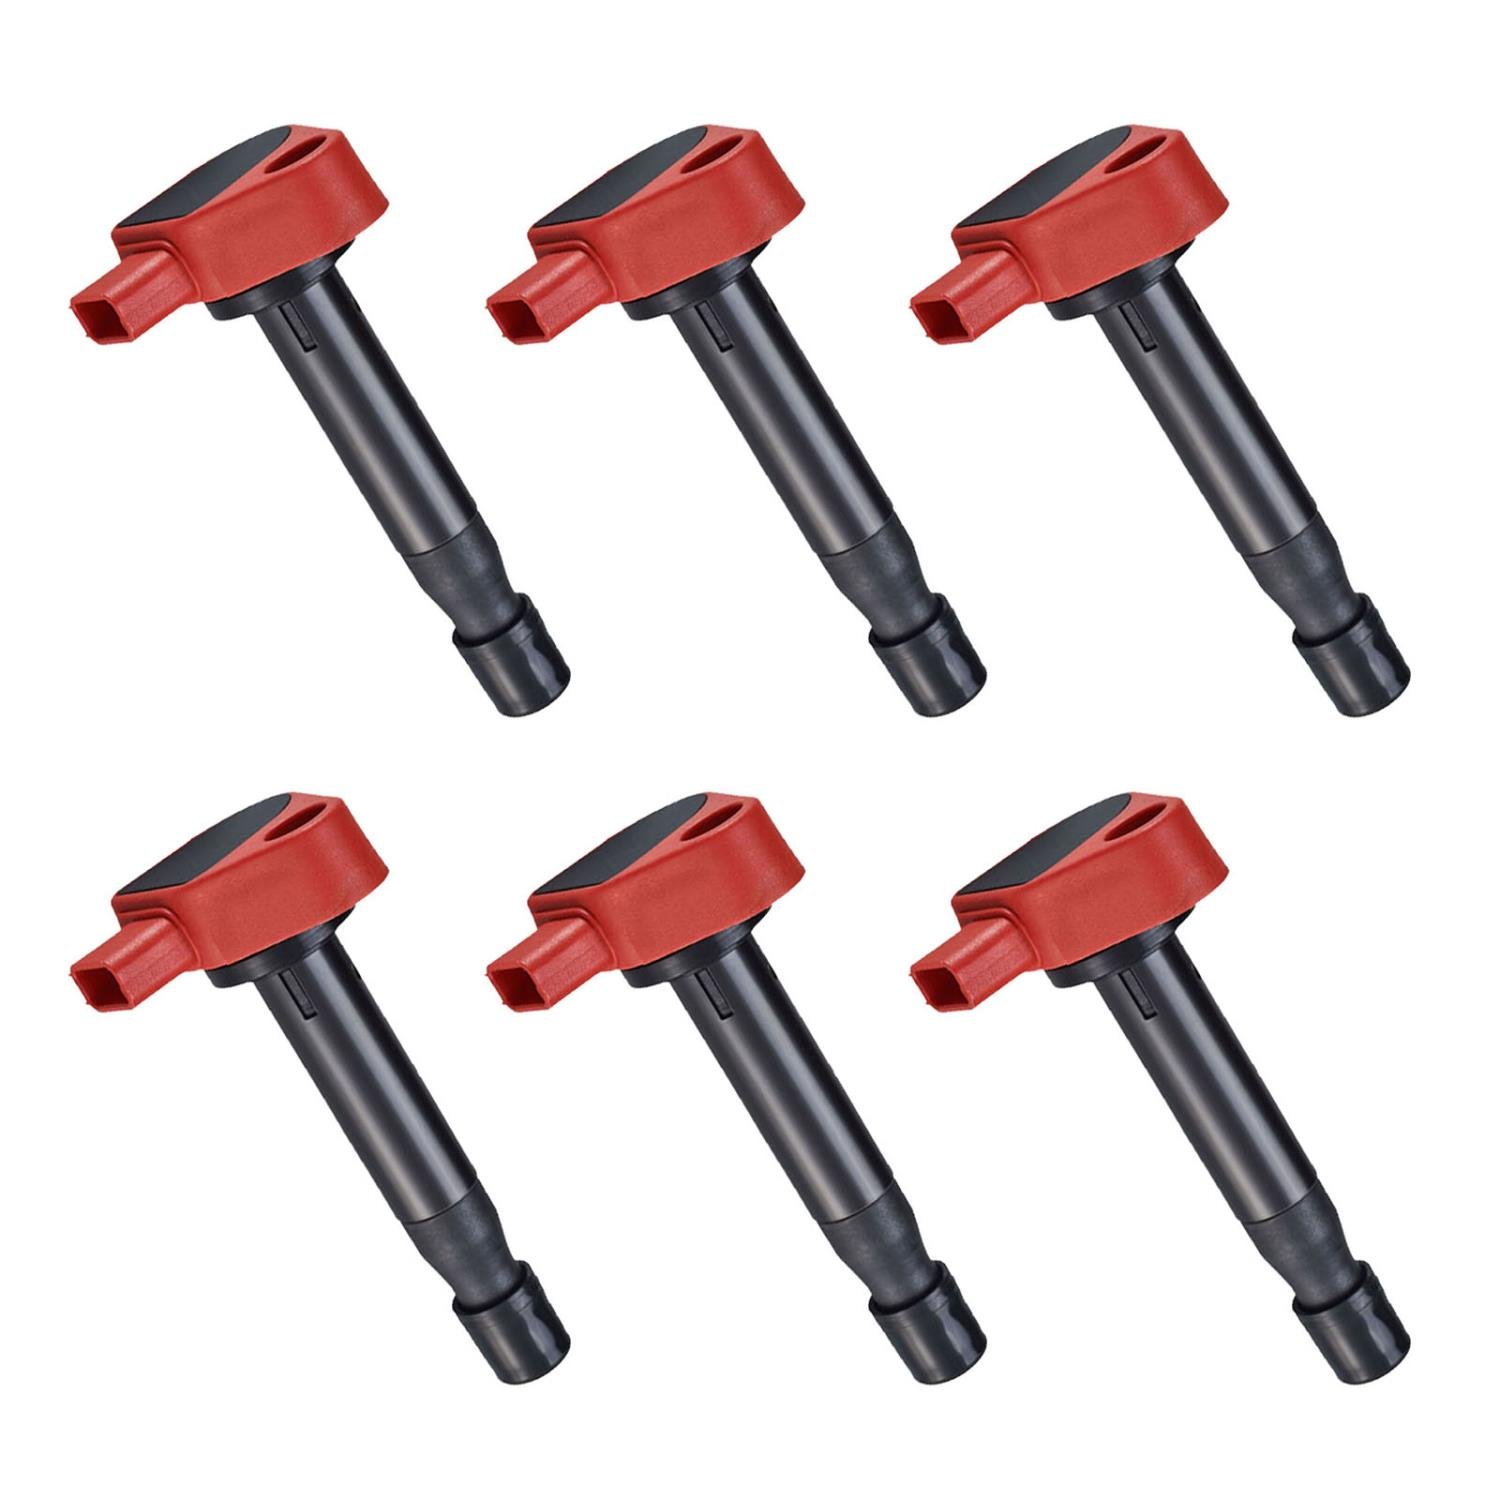 High-Performance Ignition Coils for Acura TL, Honda Accord 3.0L V6 [Red]